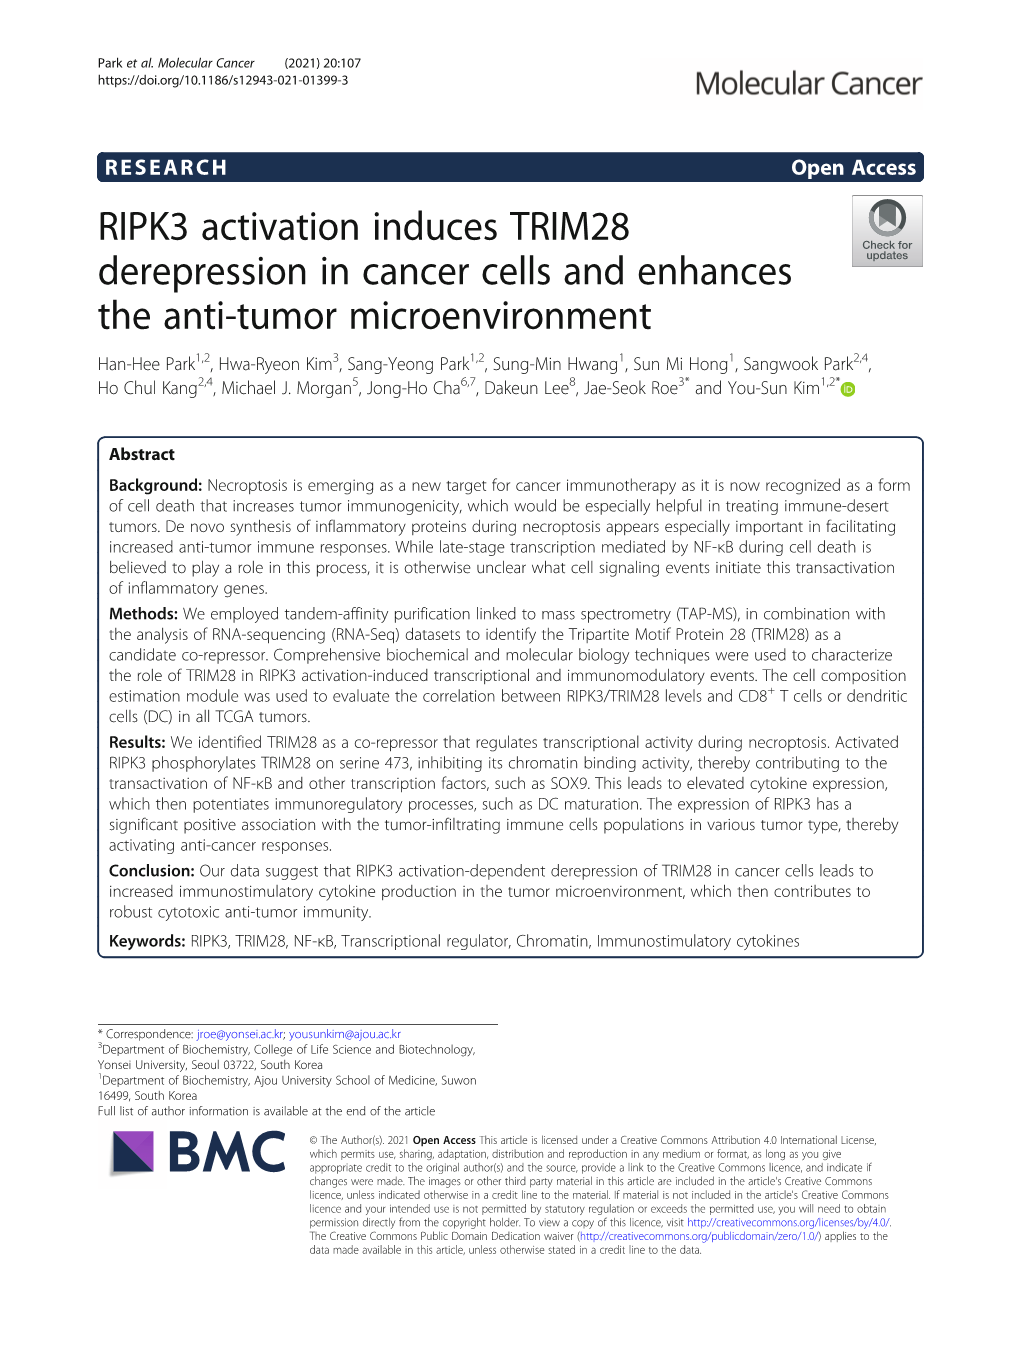 RIPK3 Activation Induces TRIM28 Derepression in Cancer Cells And